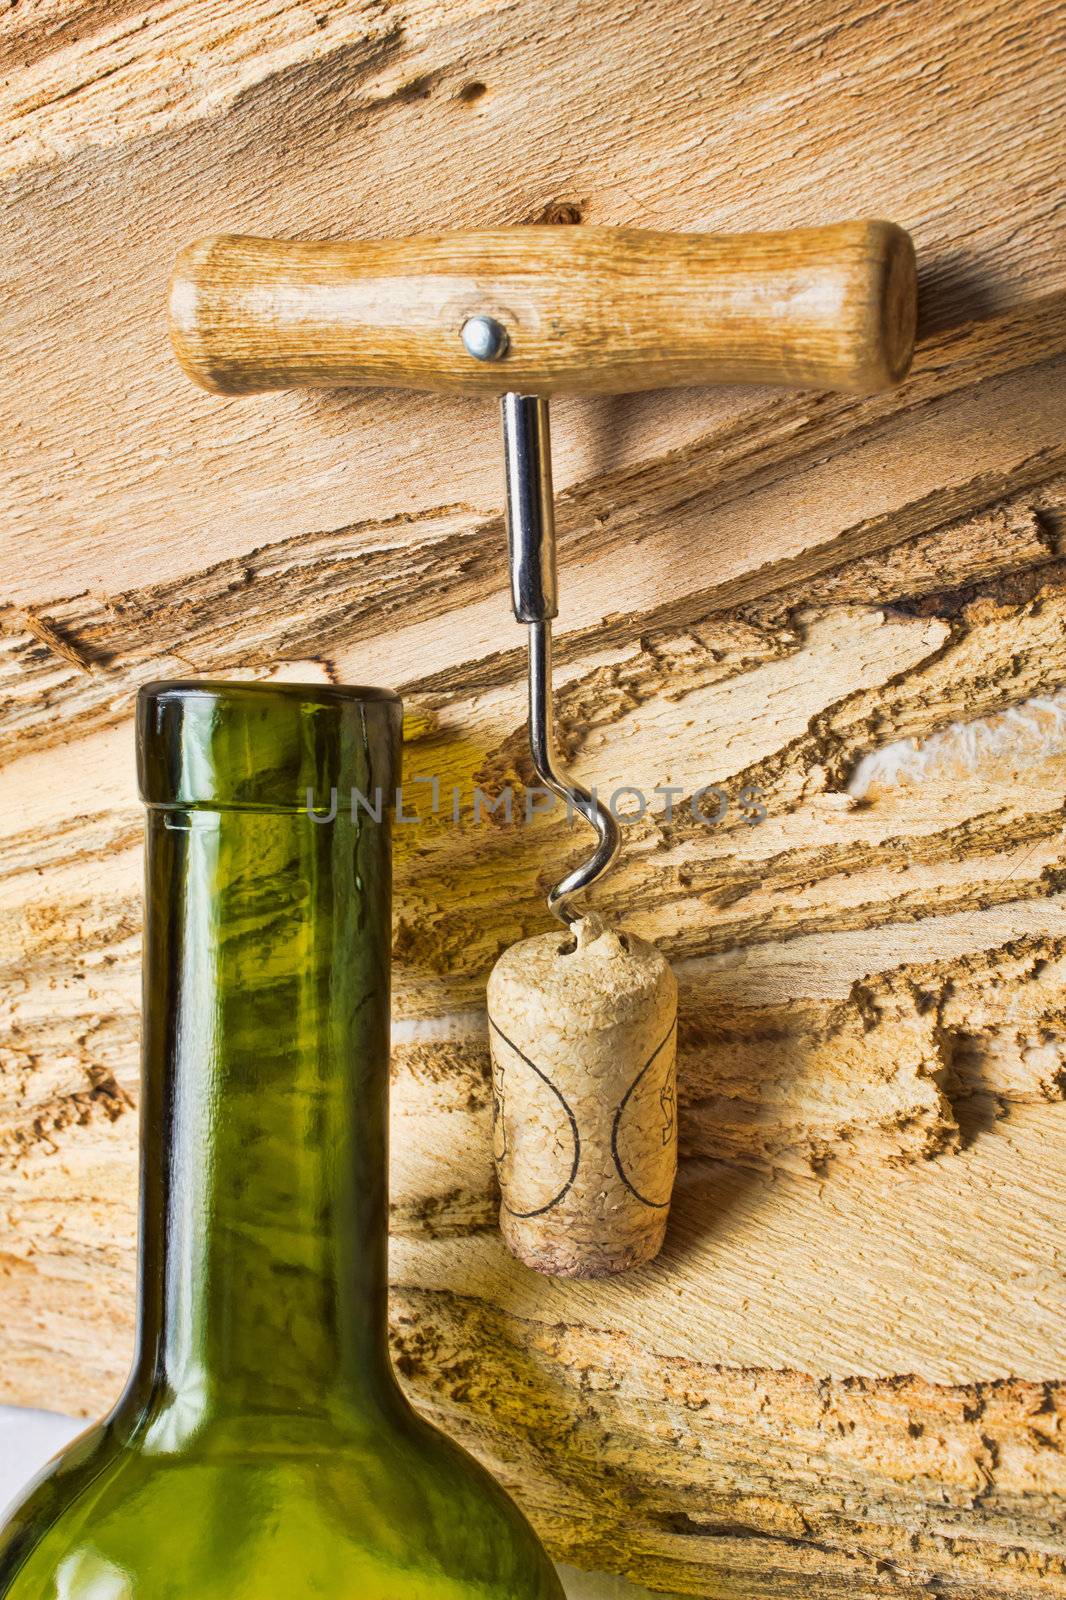 corkscrew with a cork from a bottle on the background texture of the wood